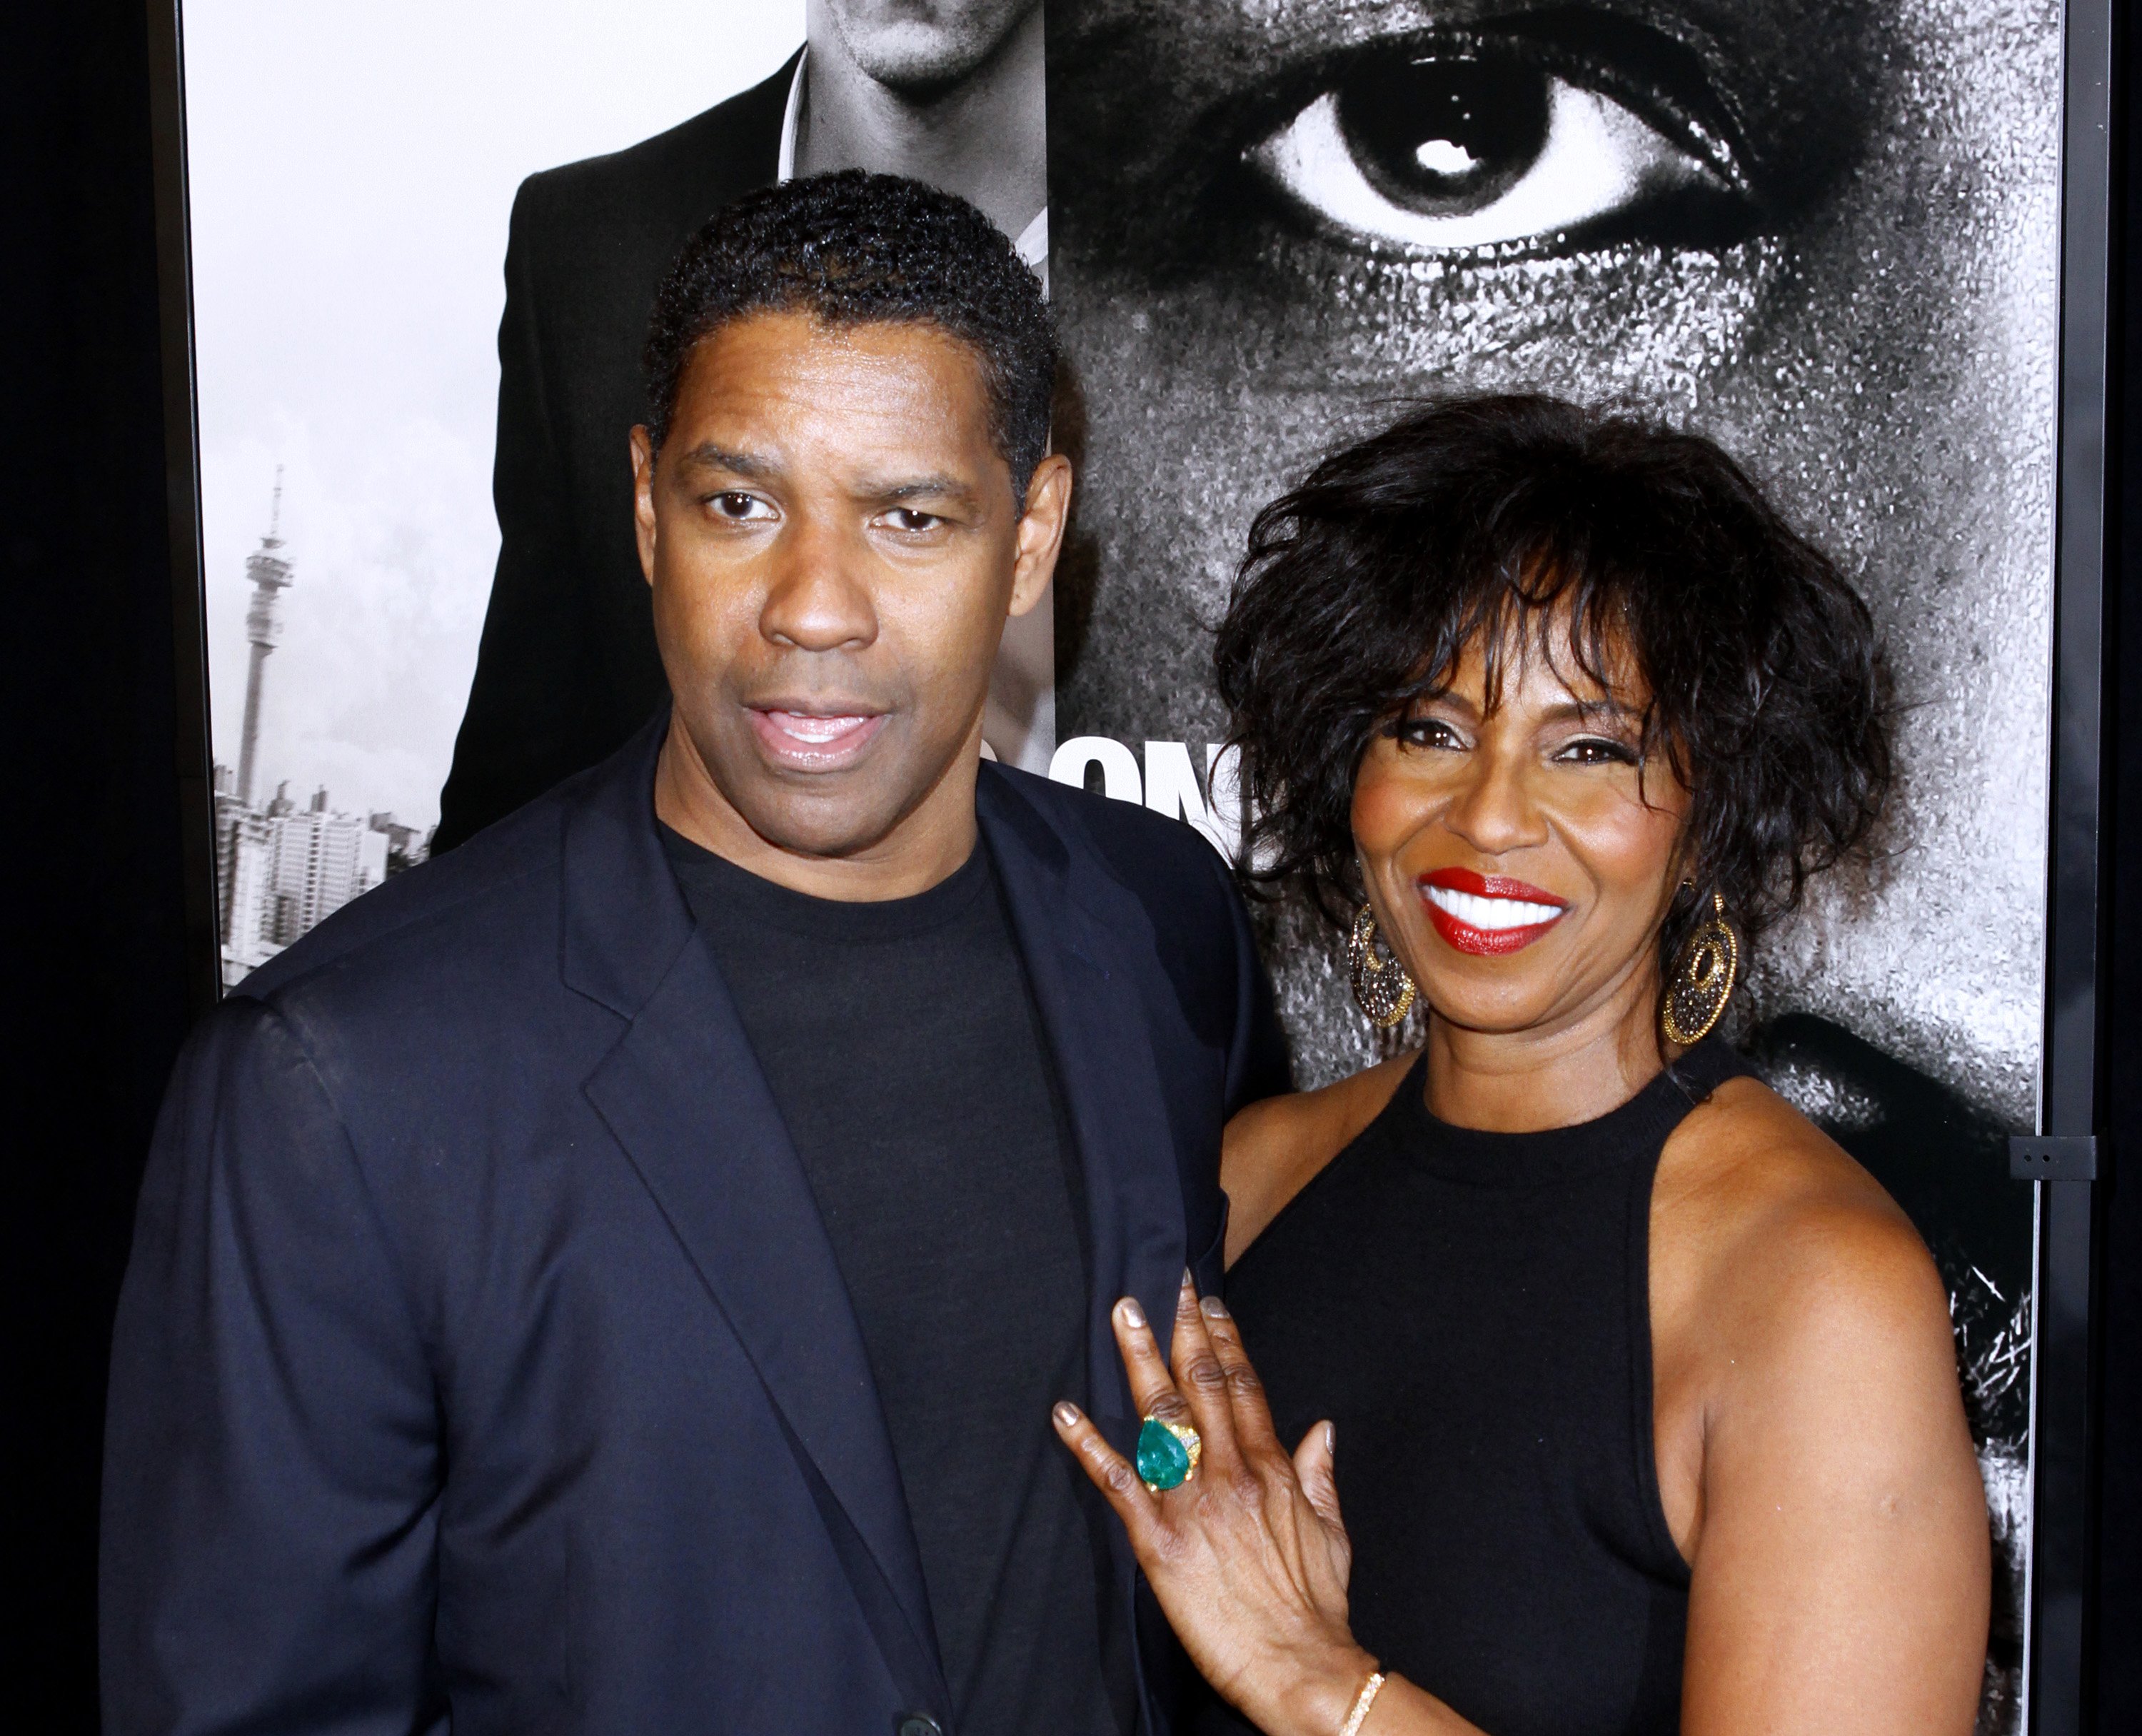 Denzel Washington and Pauletta Washington at the "Safe House" premiere in 2012 | Source: Getty Images